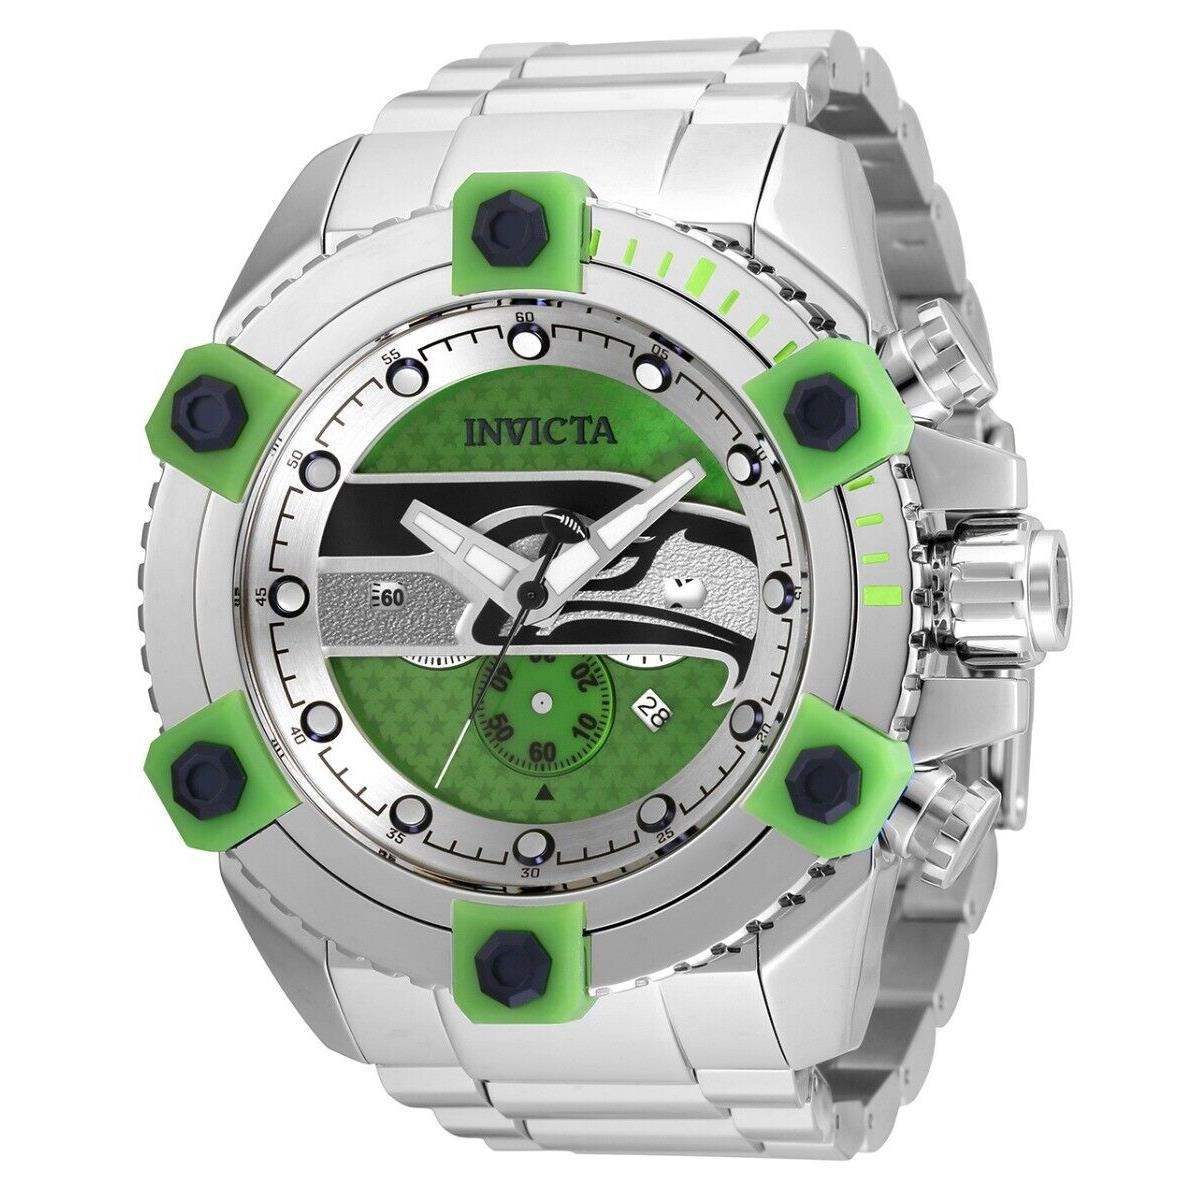 Invicta 56mm Nfl Authorized Seattle Seahawks Chronograph Silver SS Watch - Green Dial, Silver Band, Silver Bezel